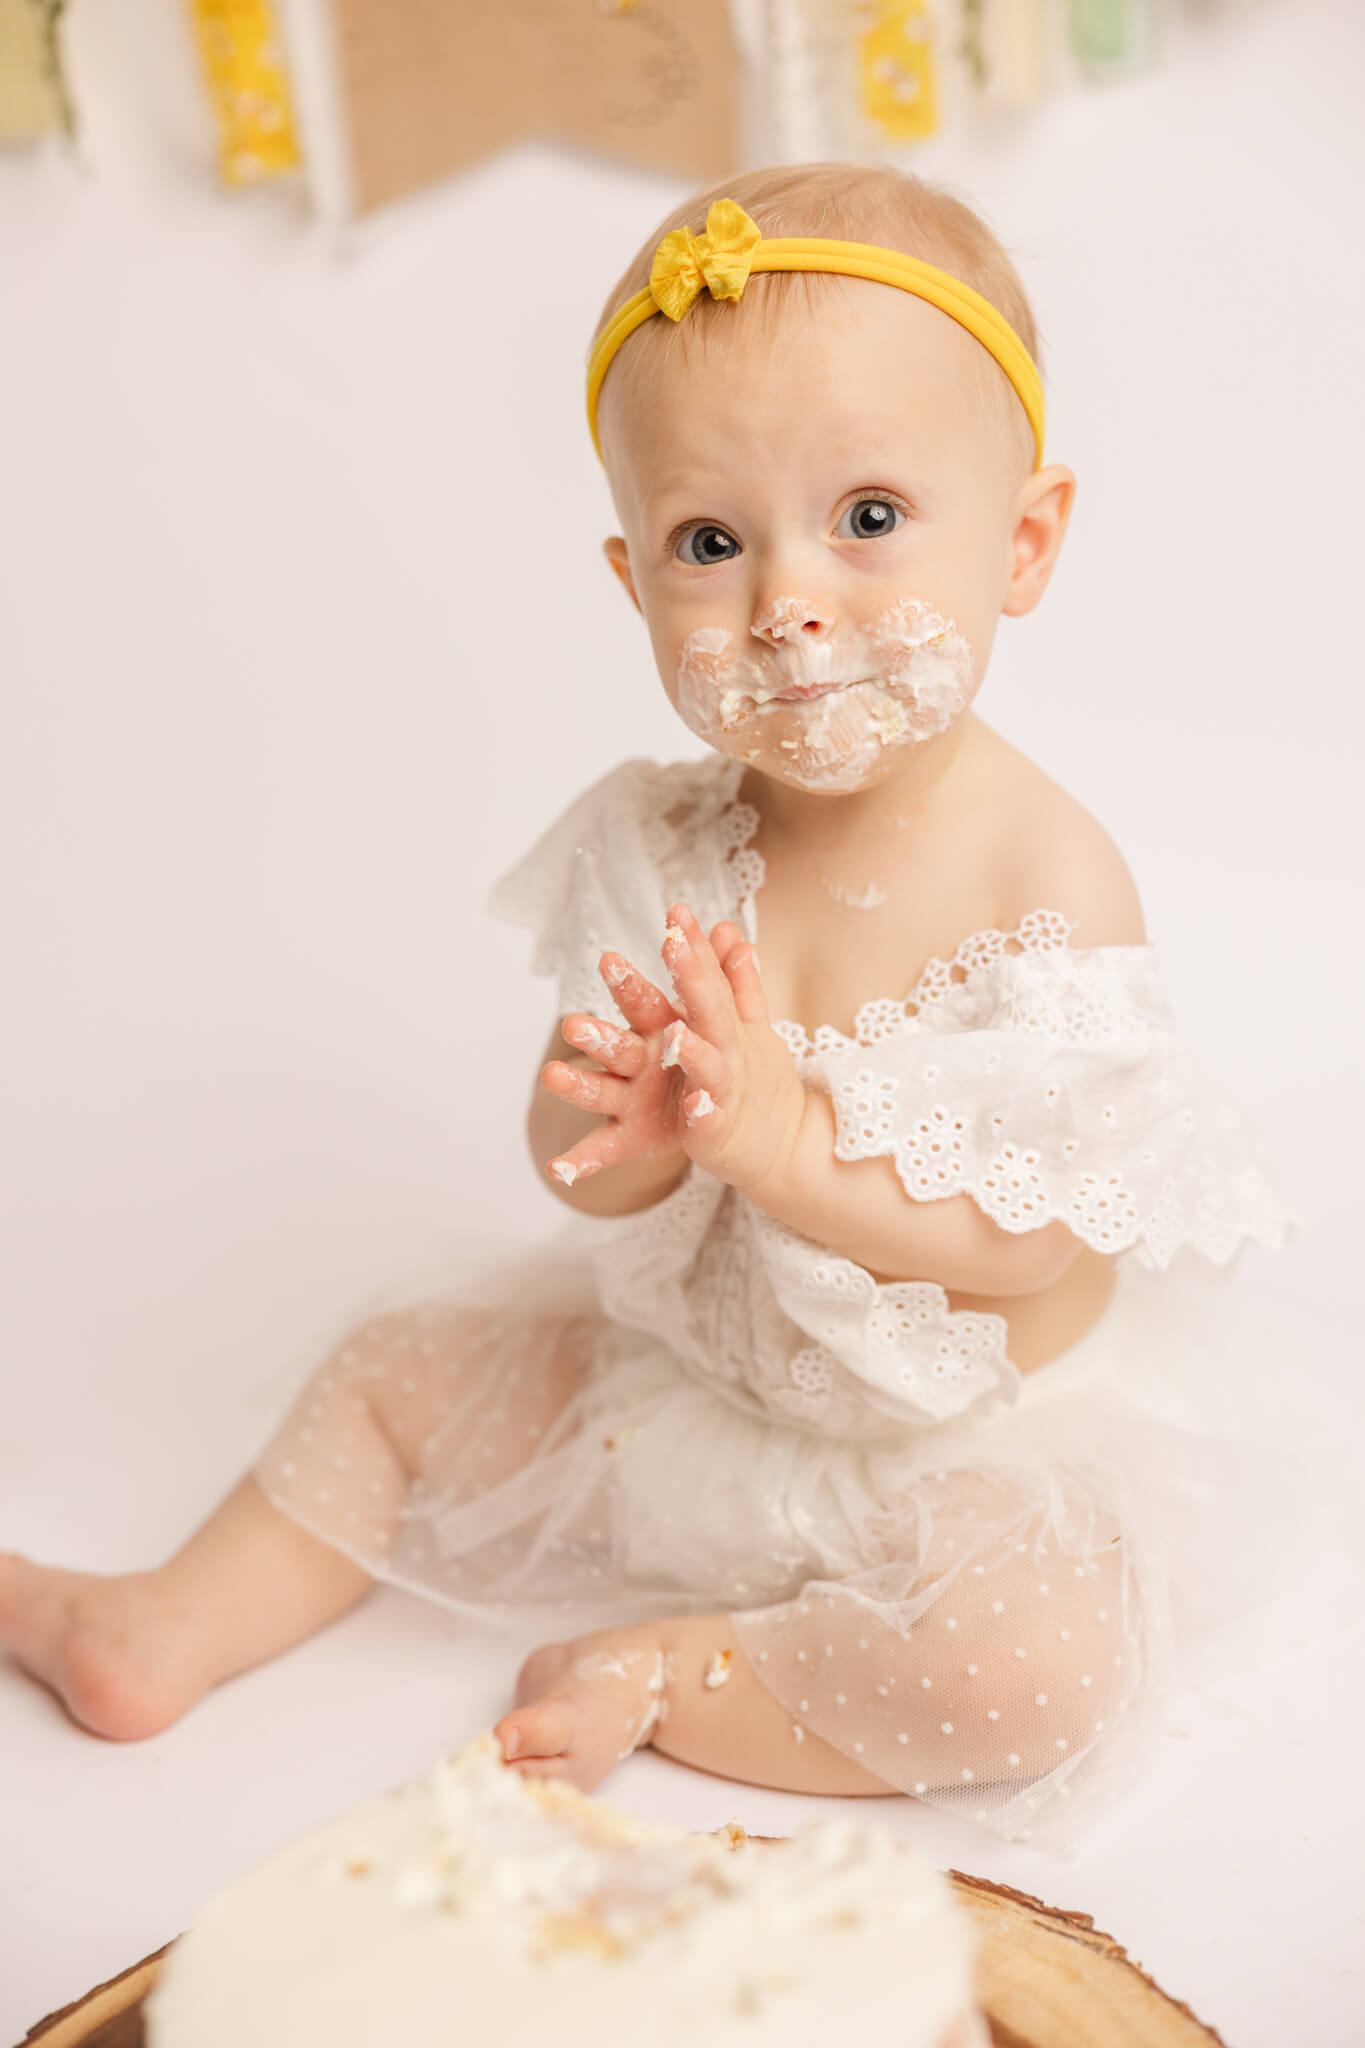 One year old clapping to celebrate her cake during her one year old cake smash session by molly berry photography